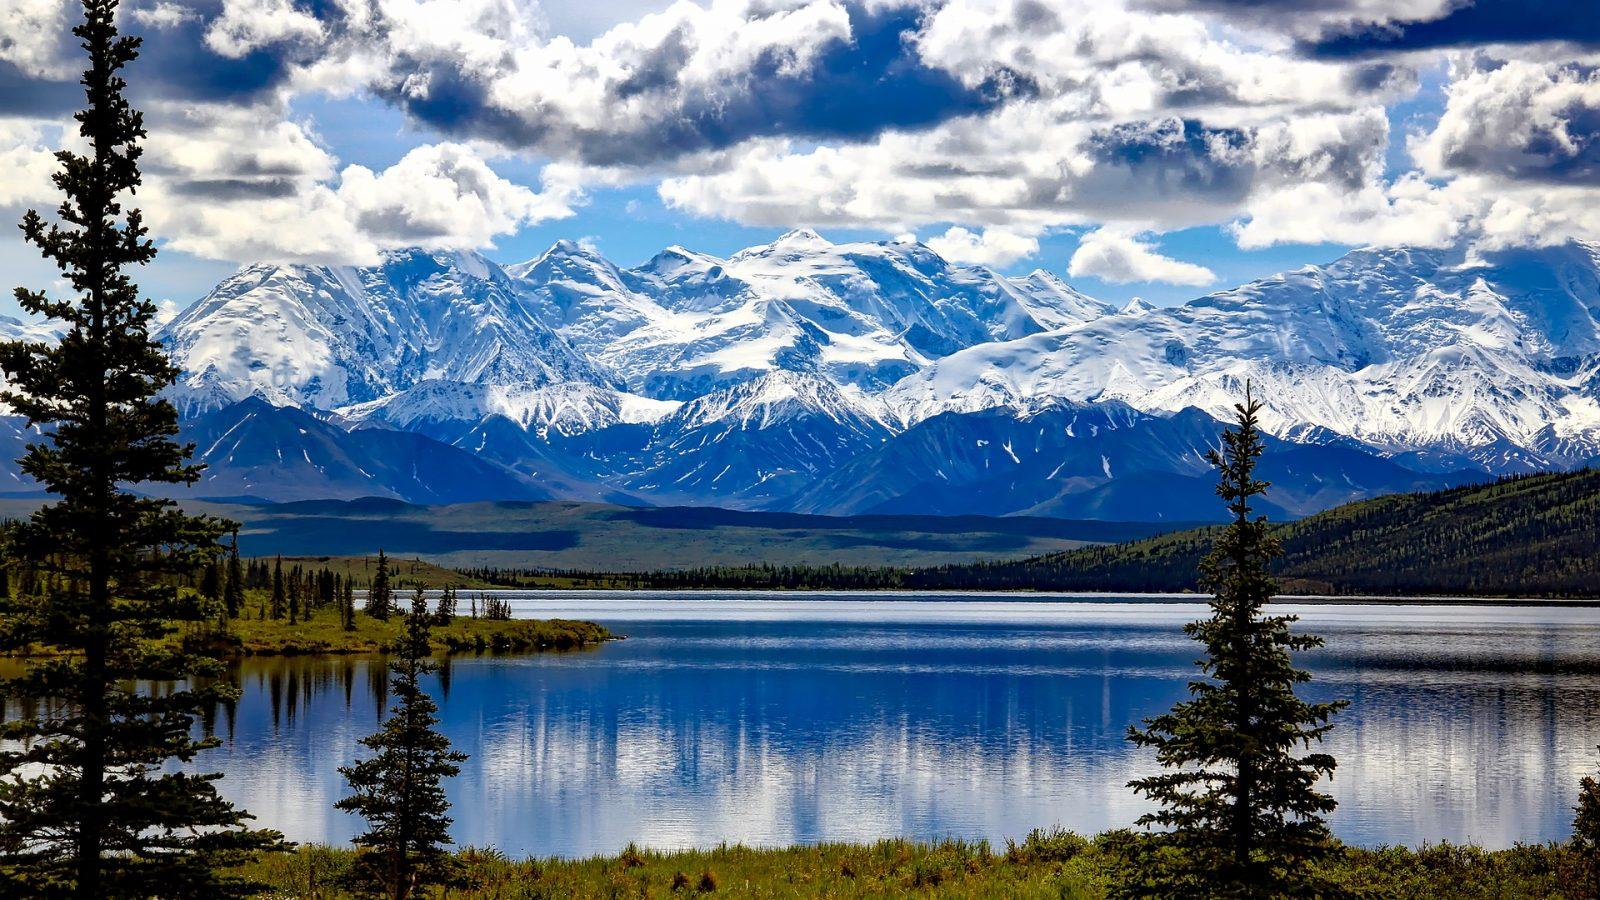 Stops To Include On The Perfect Alaska Itinerary